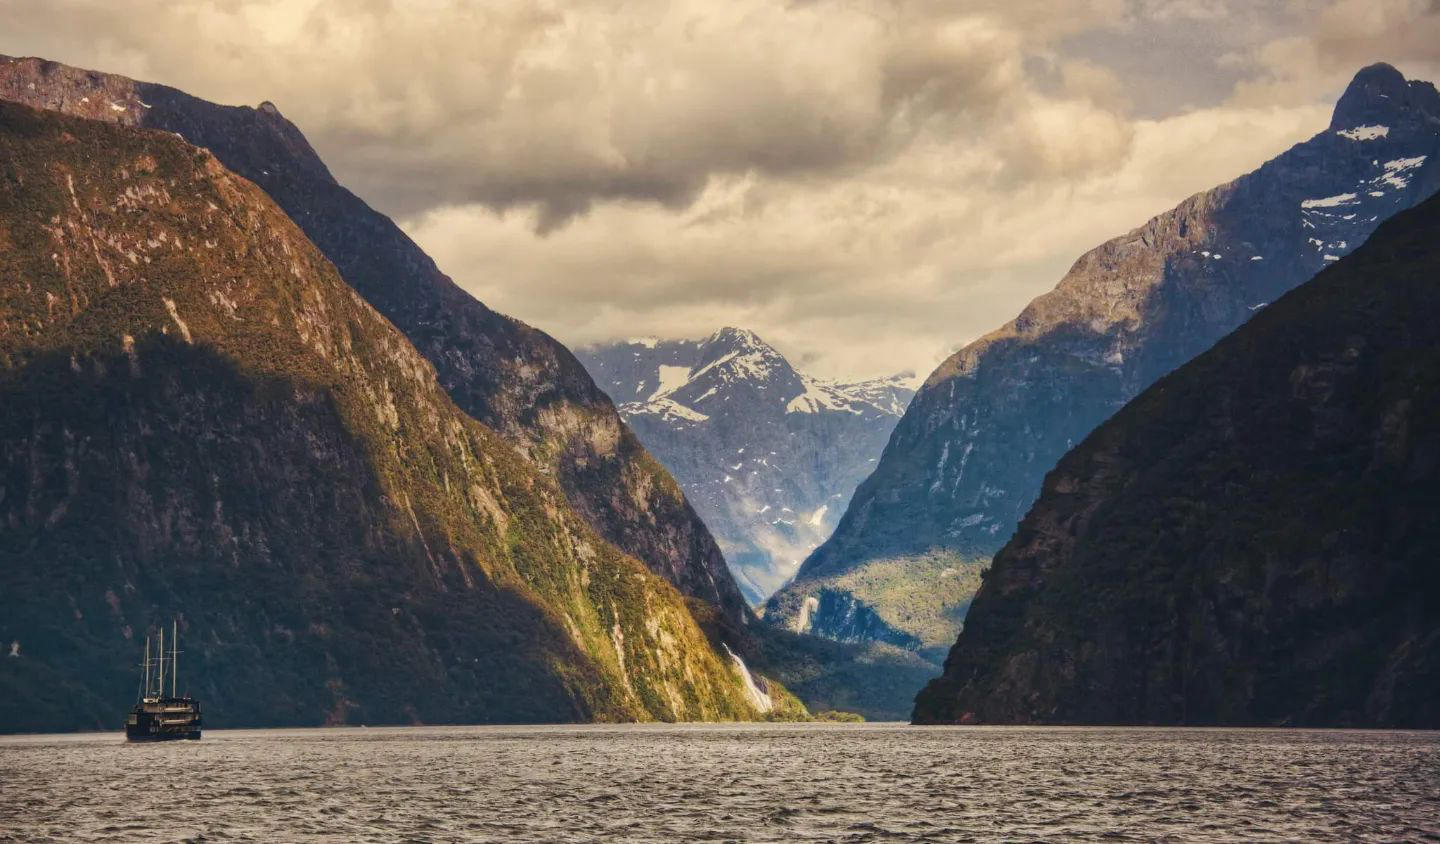 This is the entrance to Milford Sound